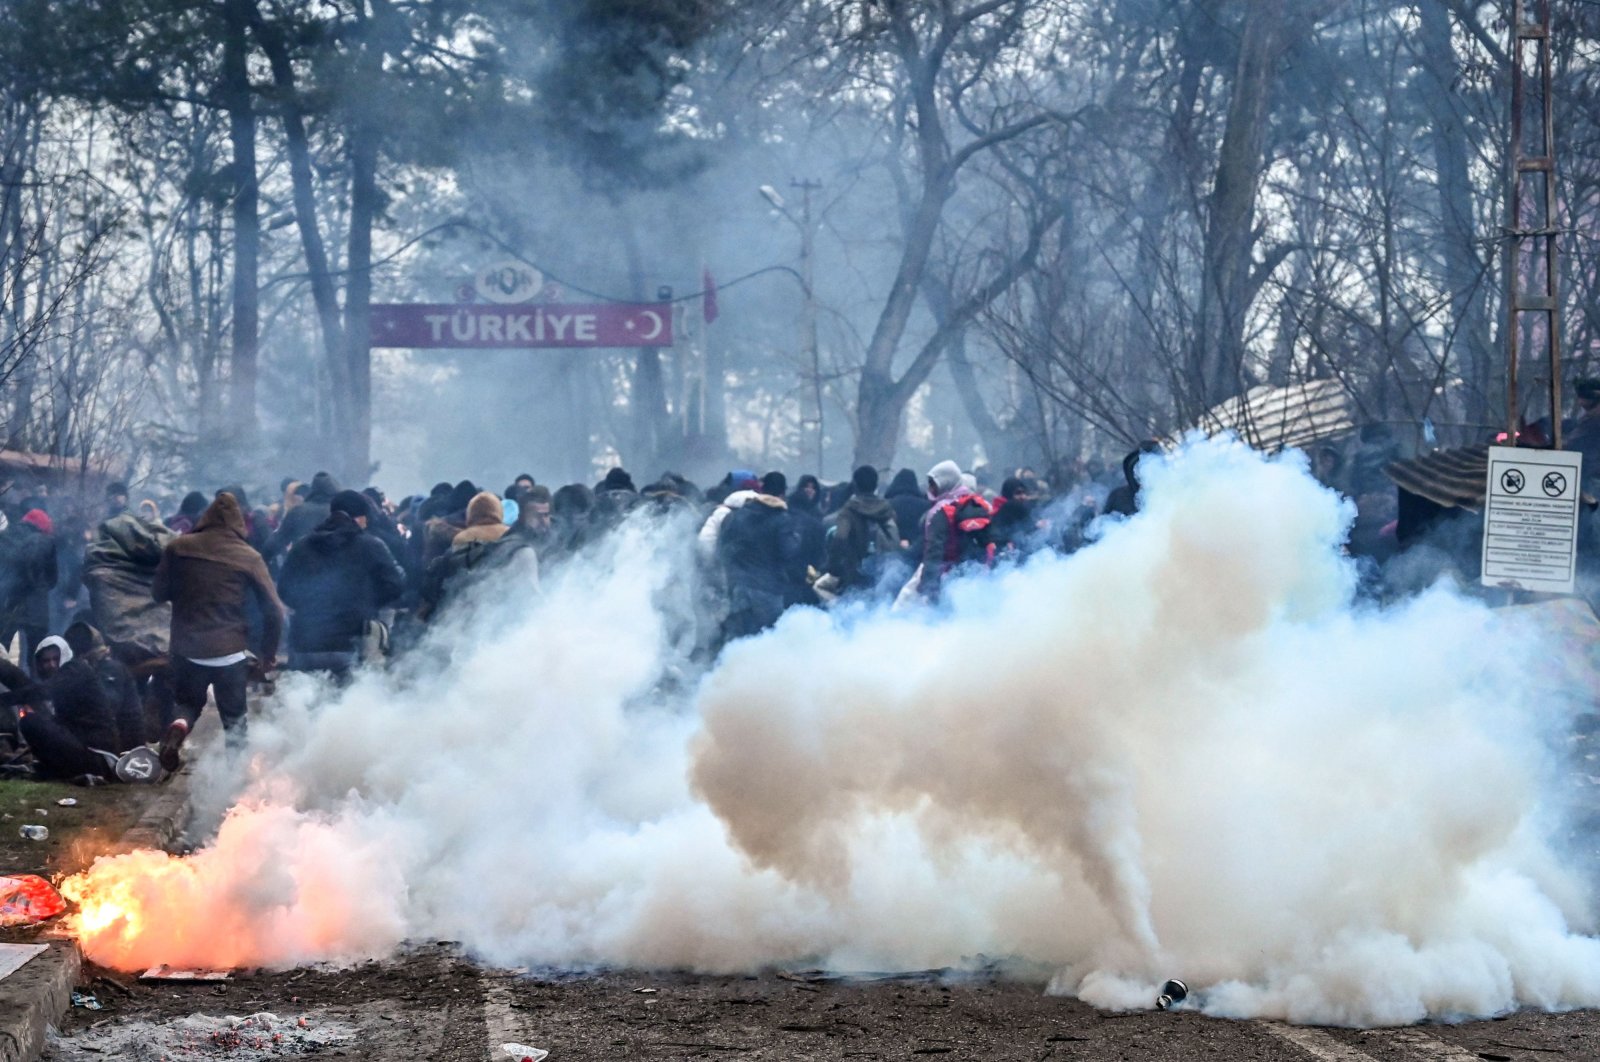 Migrants run away as Greek anti-riot police officers use tear gas in the buffer zone at the Turkey-Greece border, at Pazarkule, Turkey's Edirne province, Feb. 29, 2020. (AFP Photo)